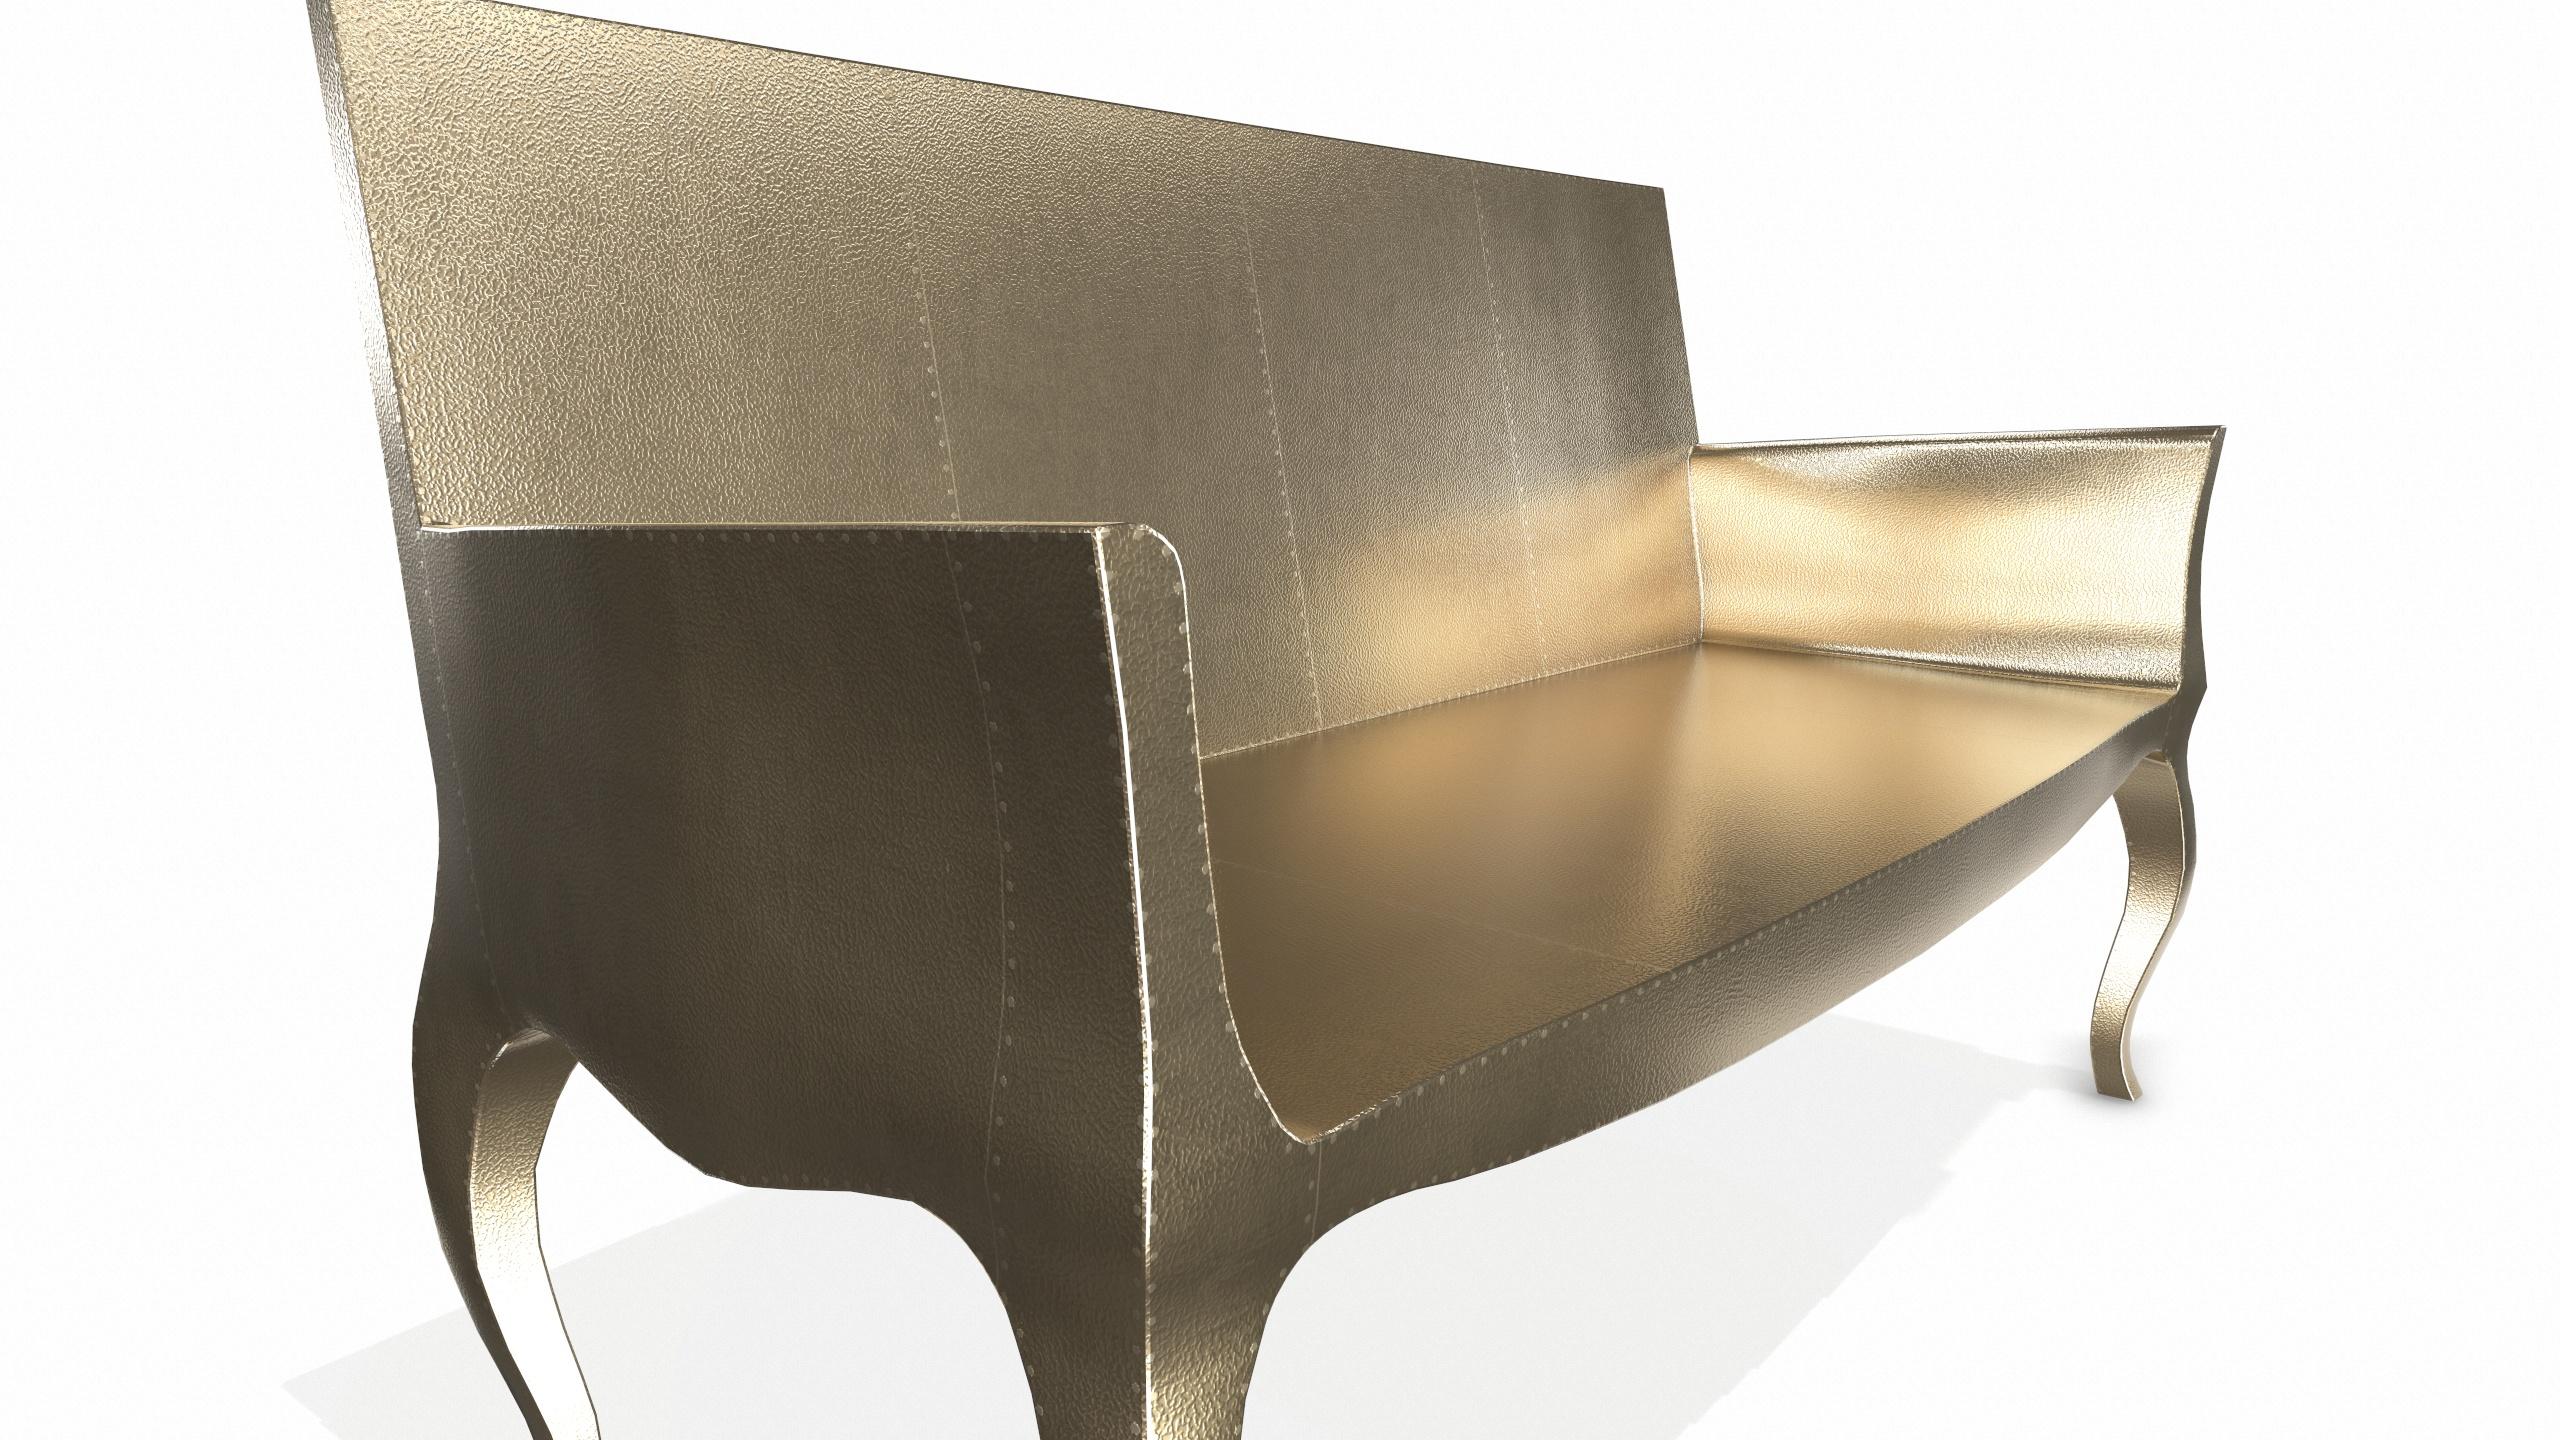 American Louise Settee Art Deco Settees in Fine Hammered Brass by Paul Mathieu For Sale